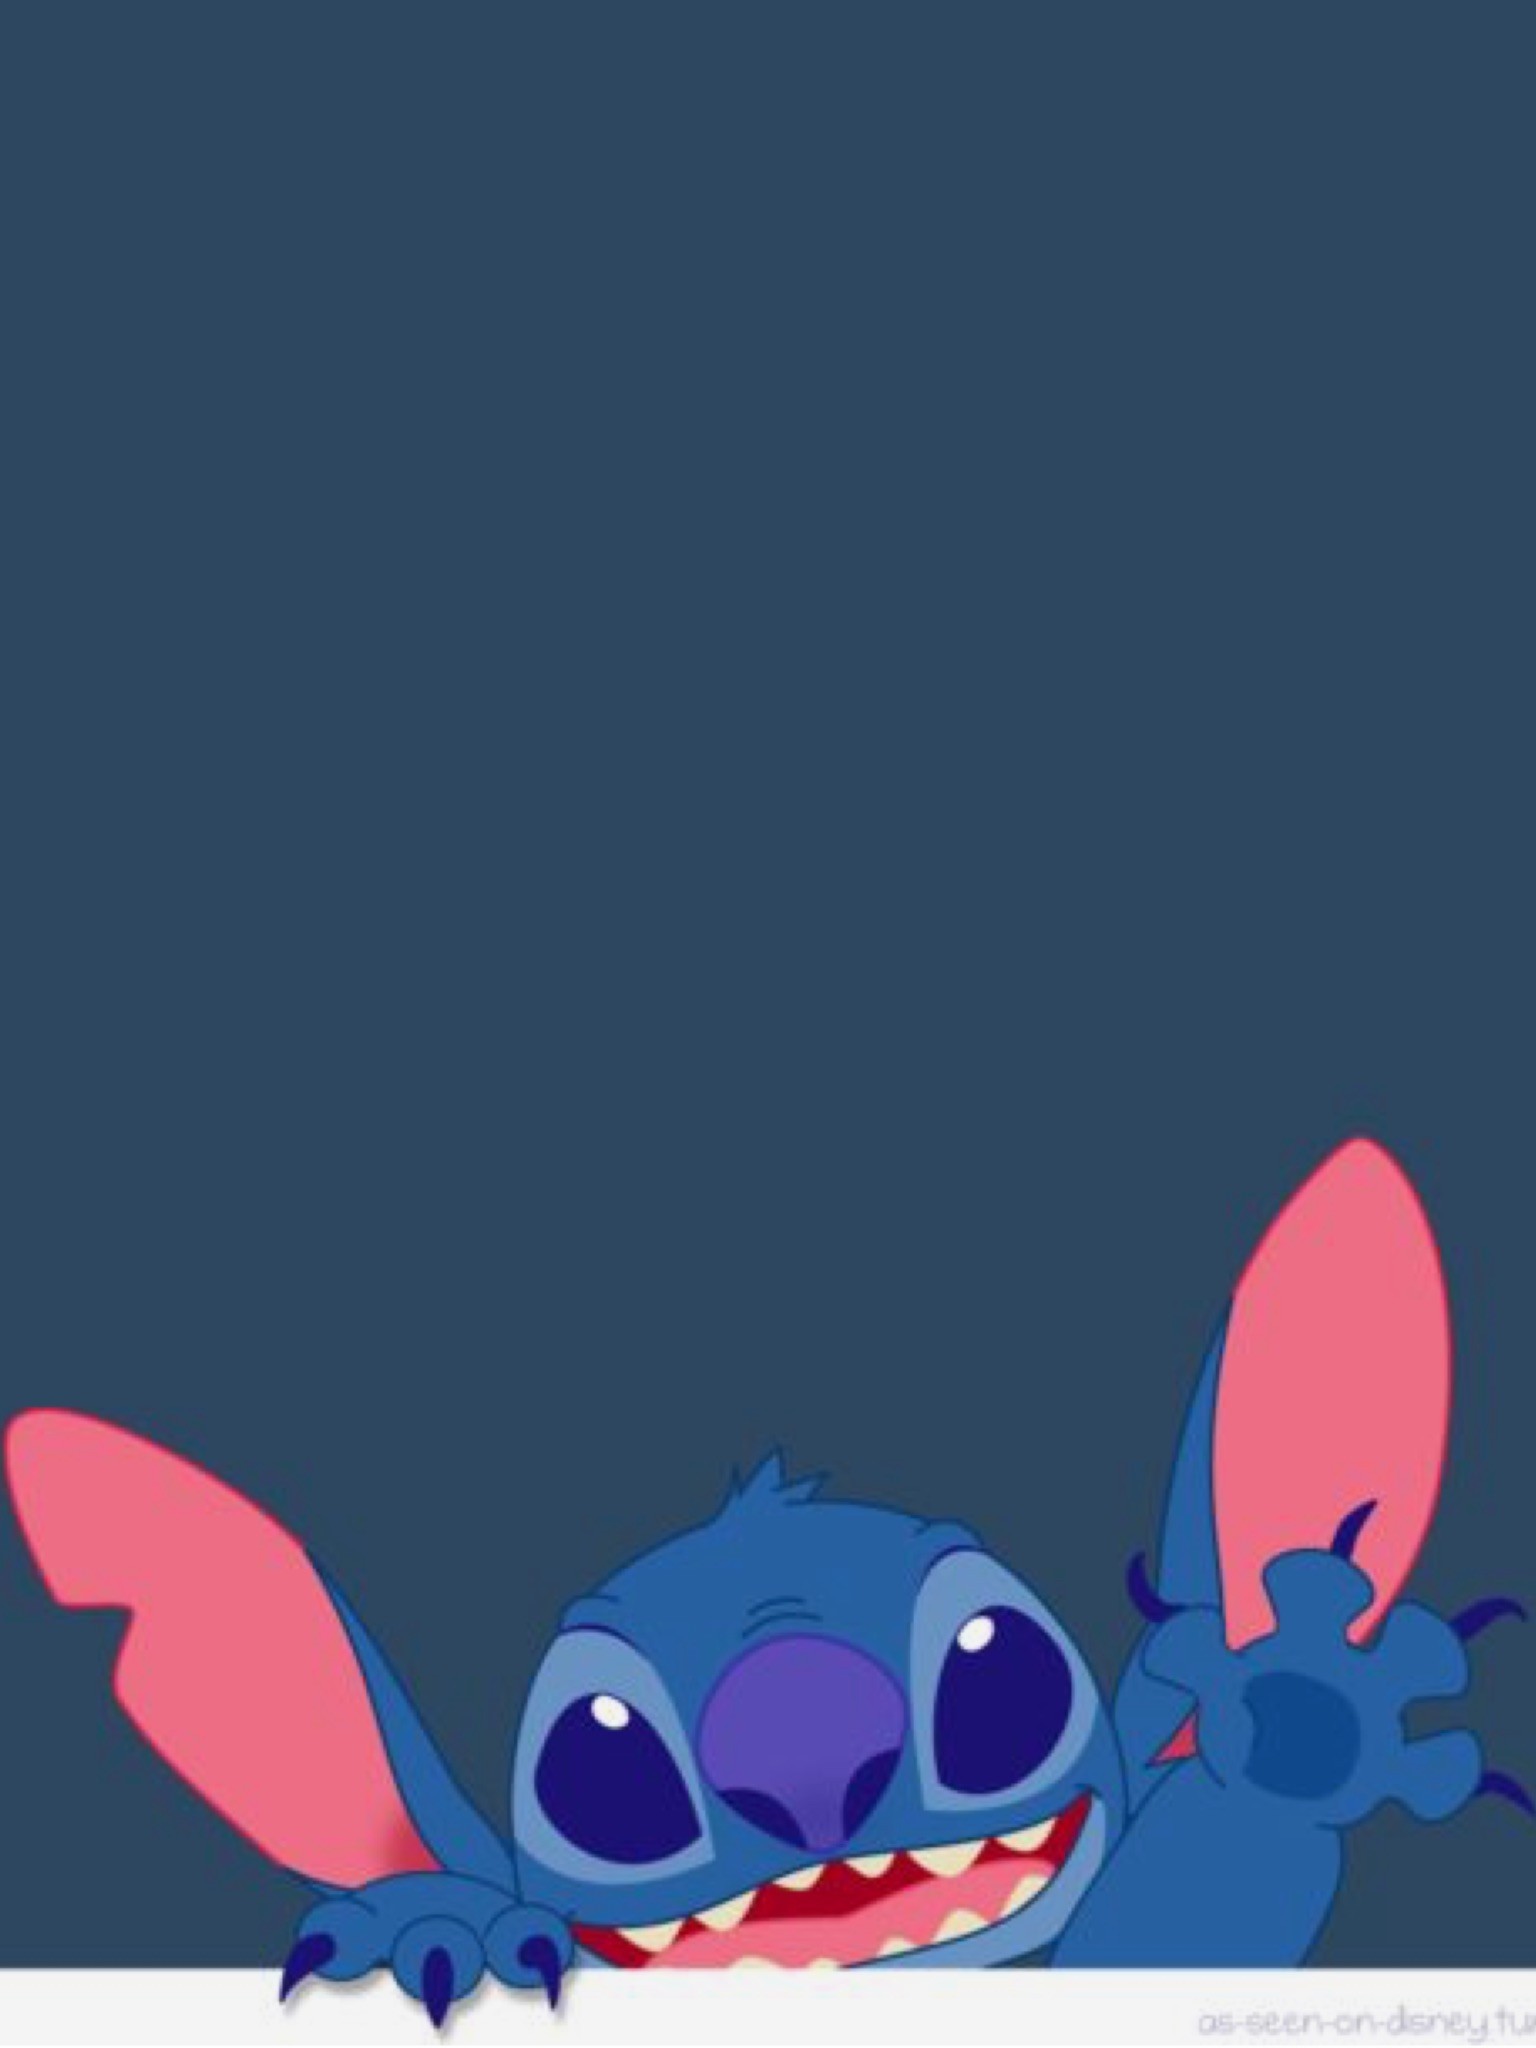 Lilo & Stitch movie wallpapers for desktop on Wallpapers Bros